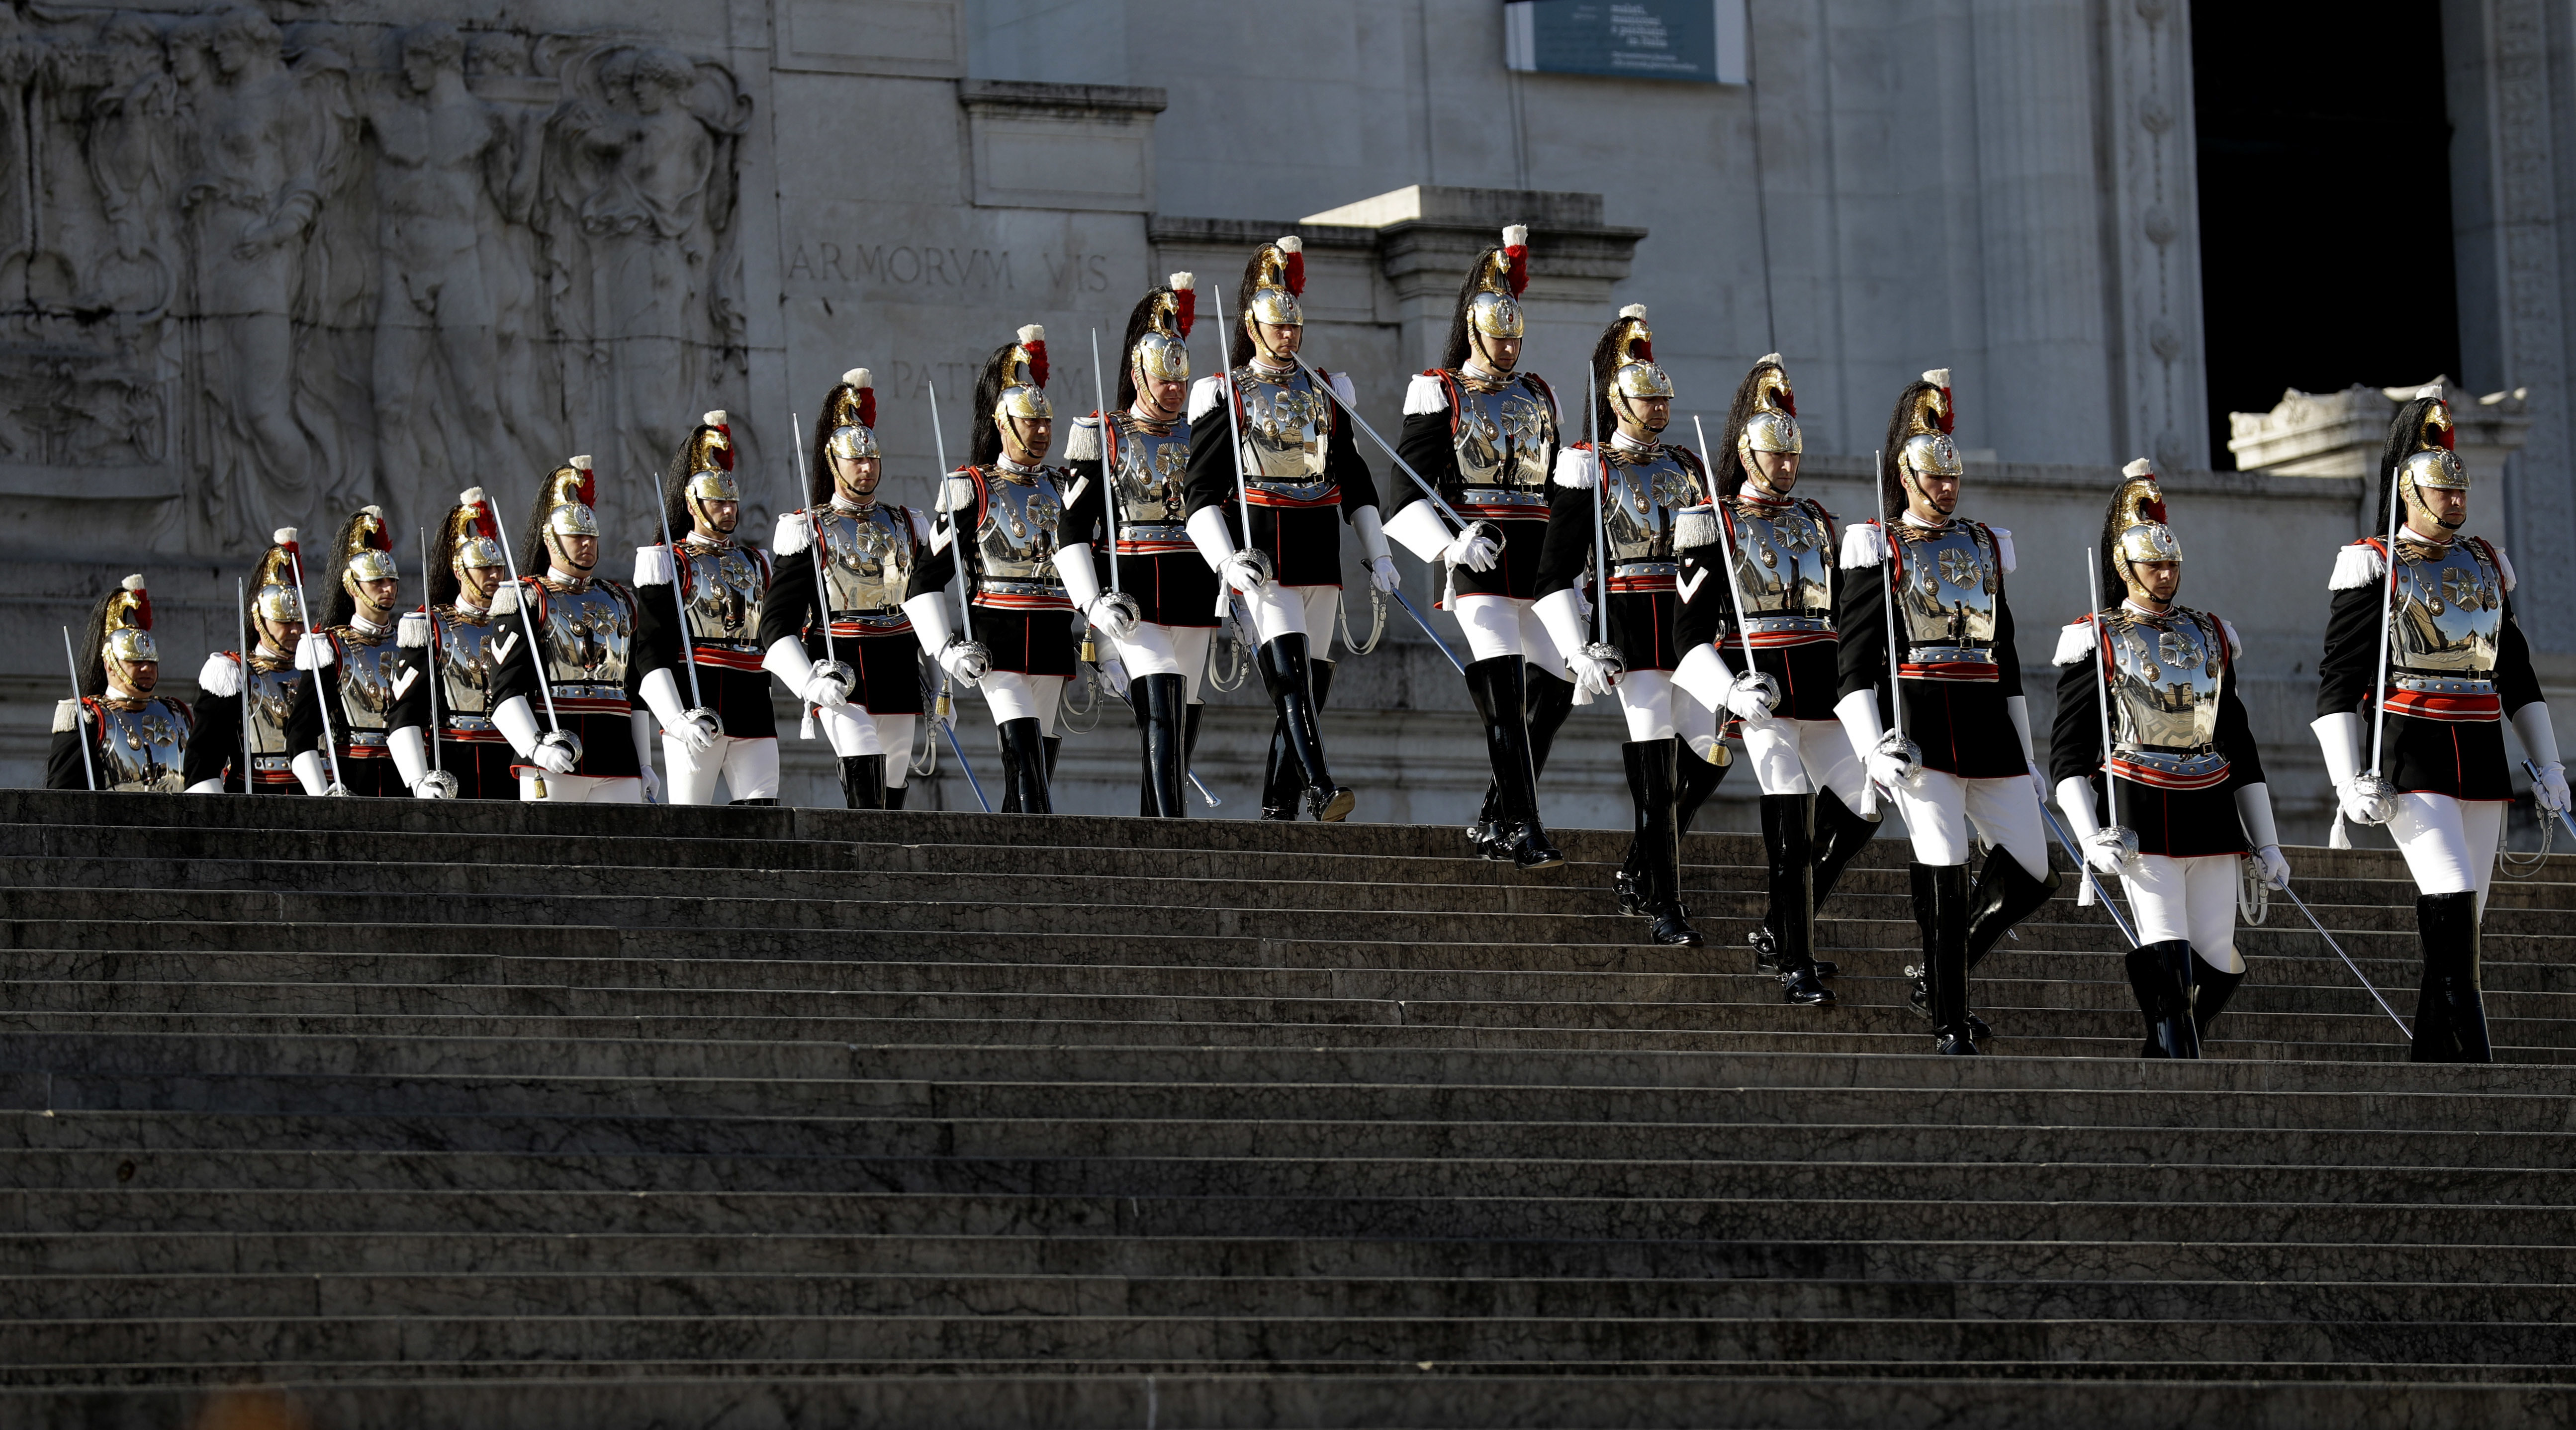 Cuirassier presidential guards descend the steps of the monument to the unknown soldier during a ceremony to mark Italy's Liberation day, in Rome, Tuesday, April 25, 2017. Italy is celebrating the anniversary of a partisan uprising against the Nazis and their Fascist allies at the end of World War II. (AP Photo/Alessandra Tarantino)